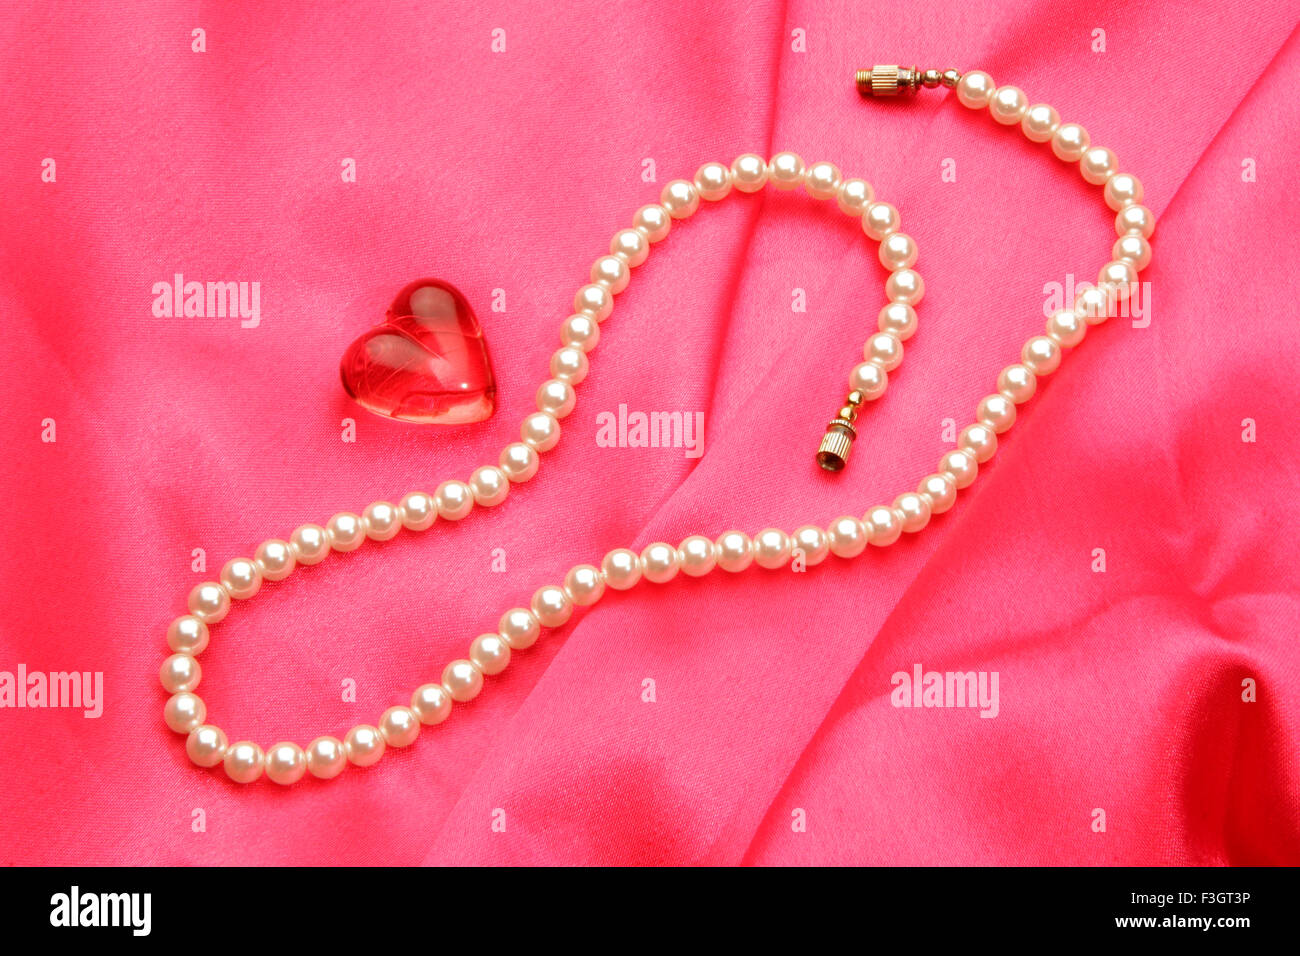 Jewellery in form pearl necklace with synthetic red gem stone of heart shape against pink satin background Stock Photo